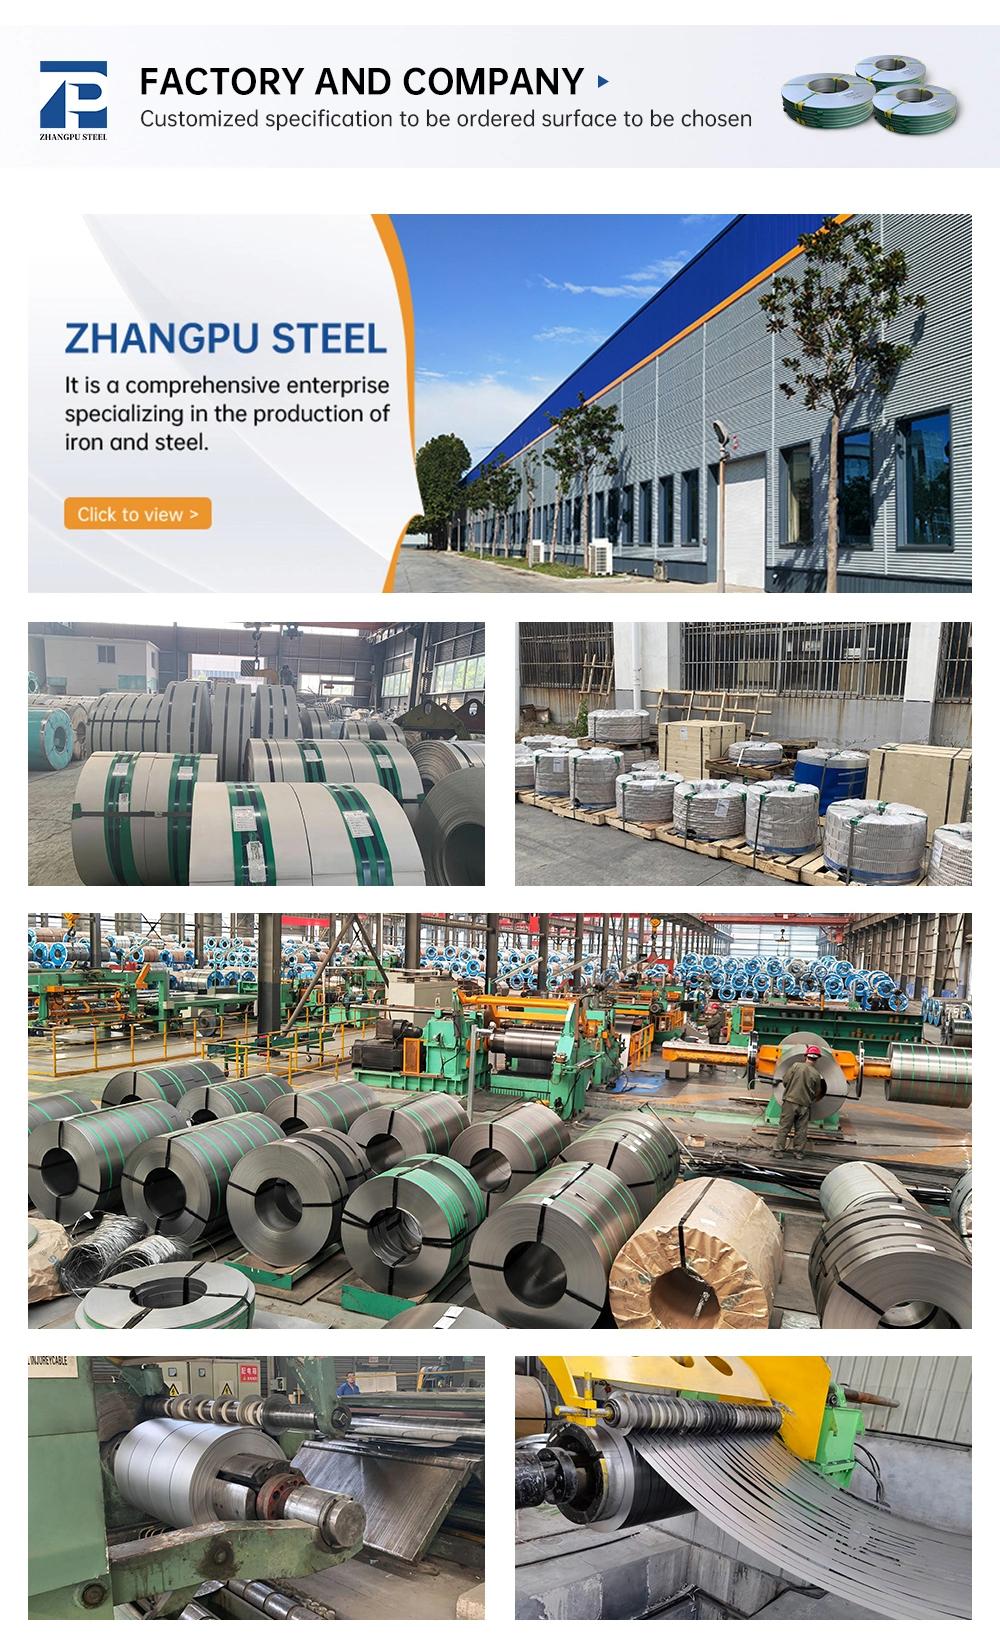 Aiyia Ss Steel Coil Sheet Plate Strip Grade 201 202 204 301 302 304 306 321 308 310 316 410 430 904L 2b Ba Stainless Steel Coil